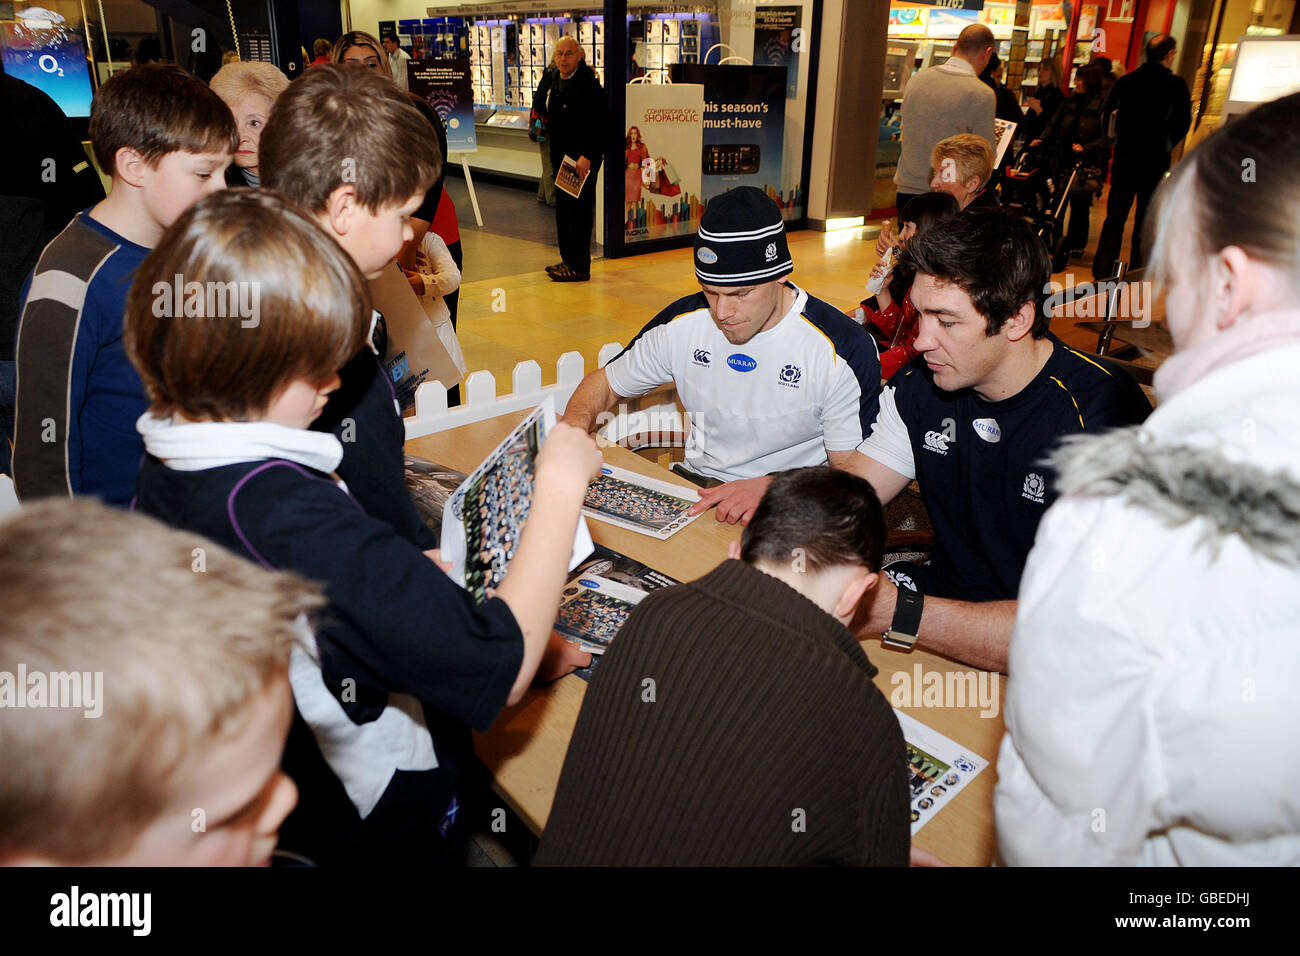 Nathan Hines (right) and Simon Webster (left) sign autographs for fans during a rugby fun day at the Ocean Terminal, Edinburgh. Stock Photo